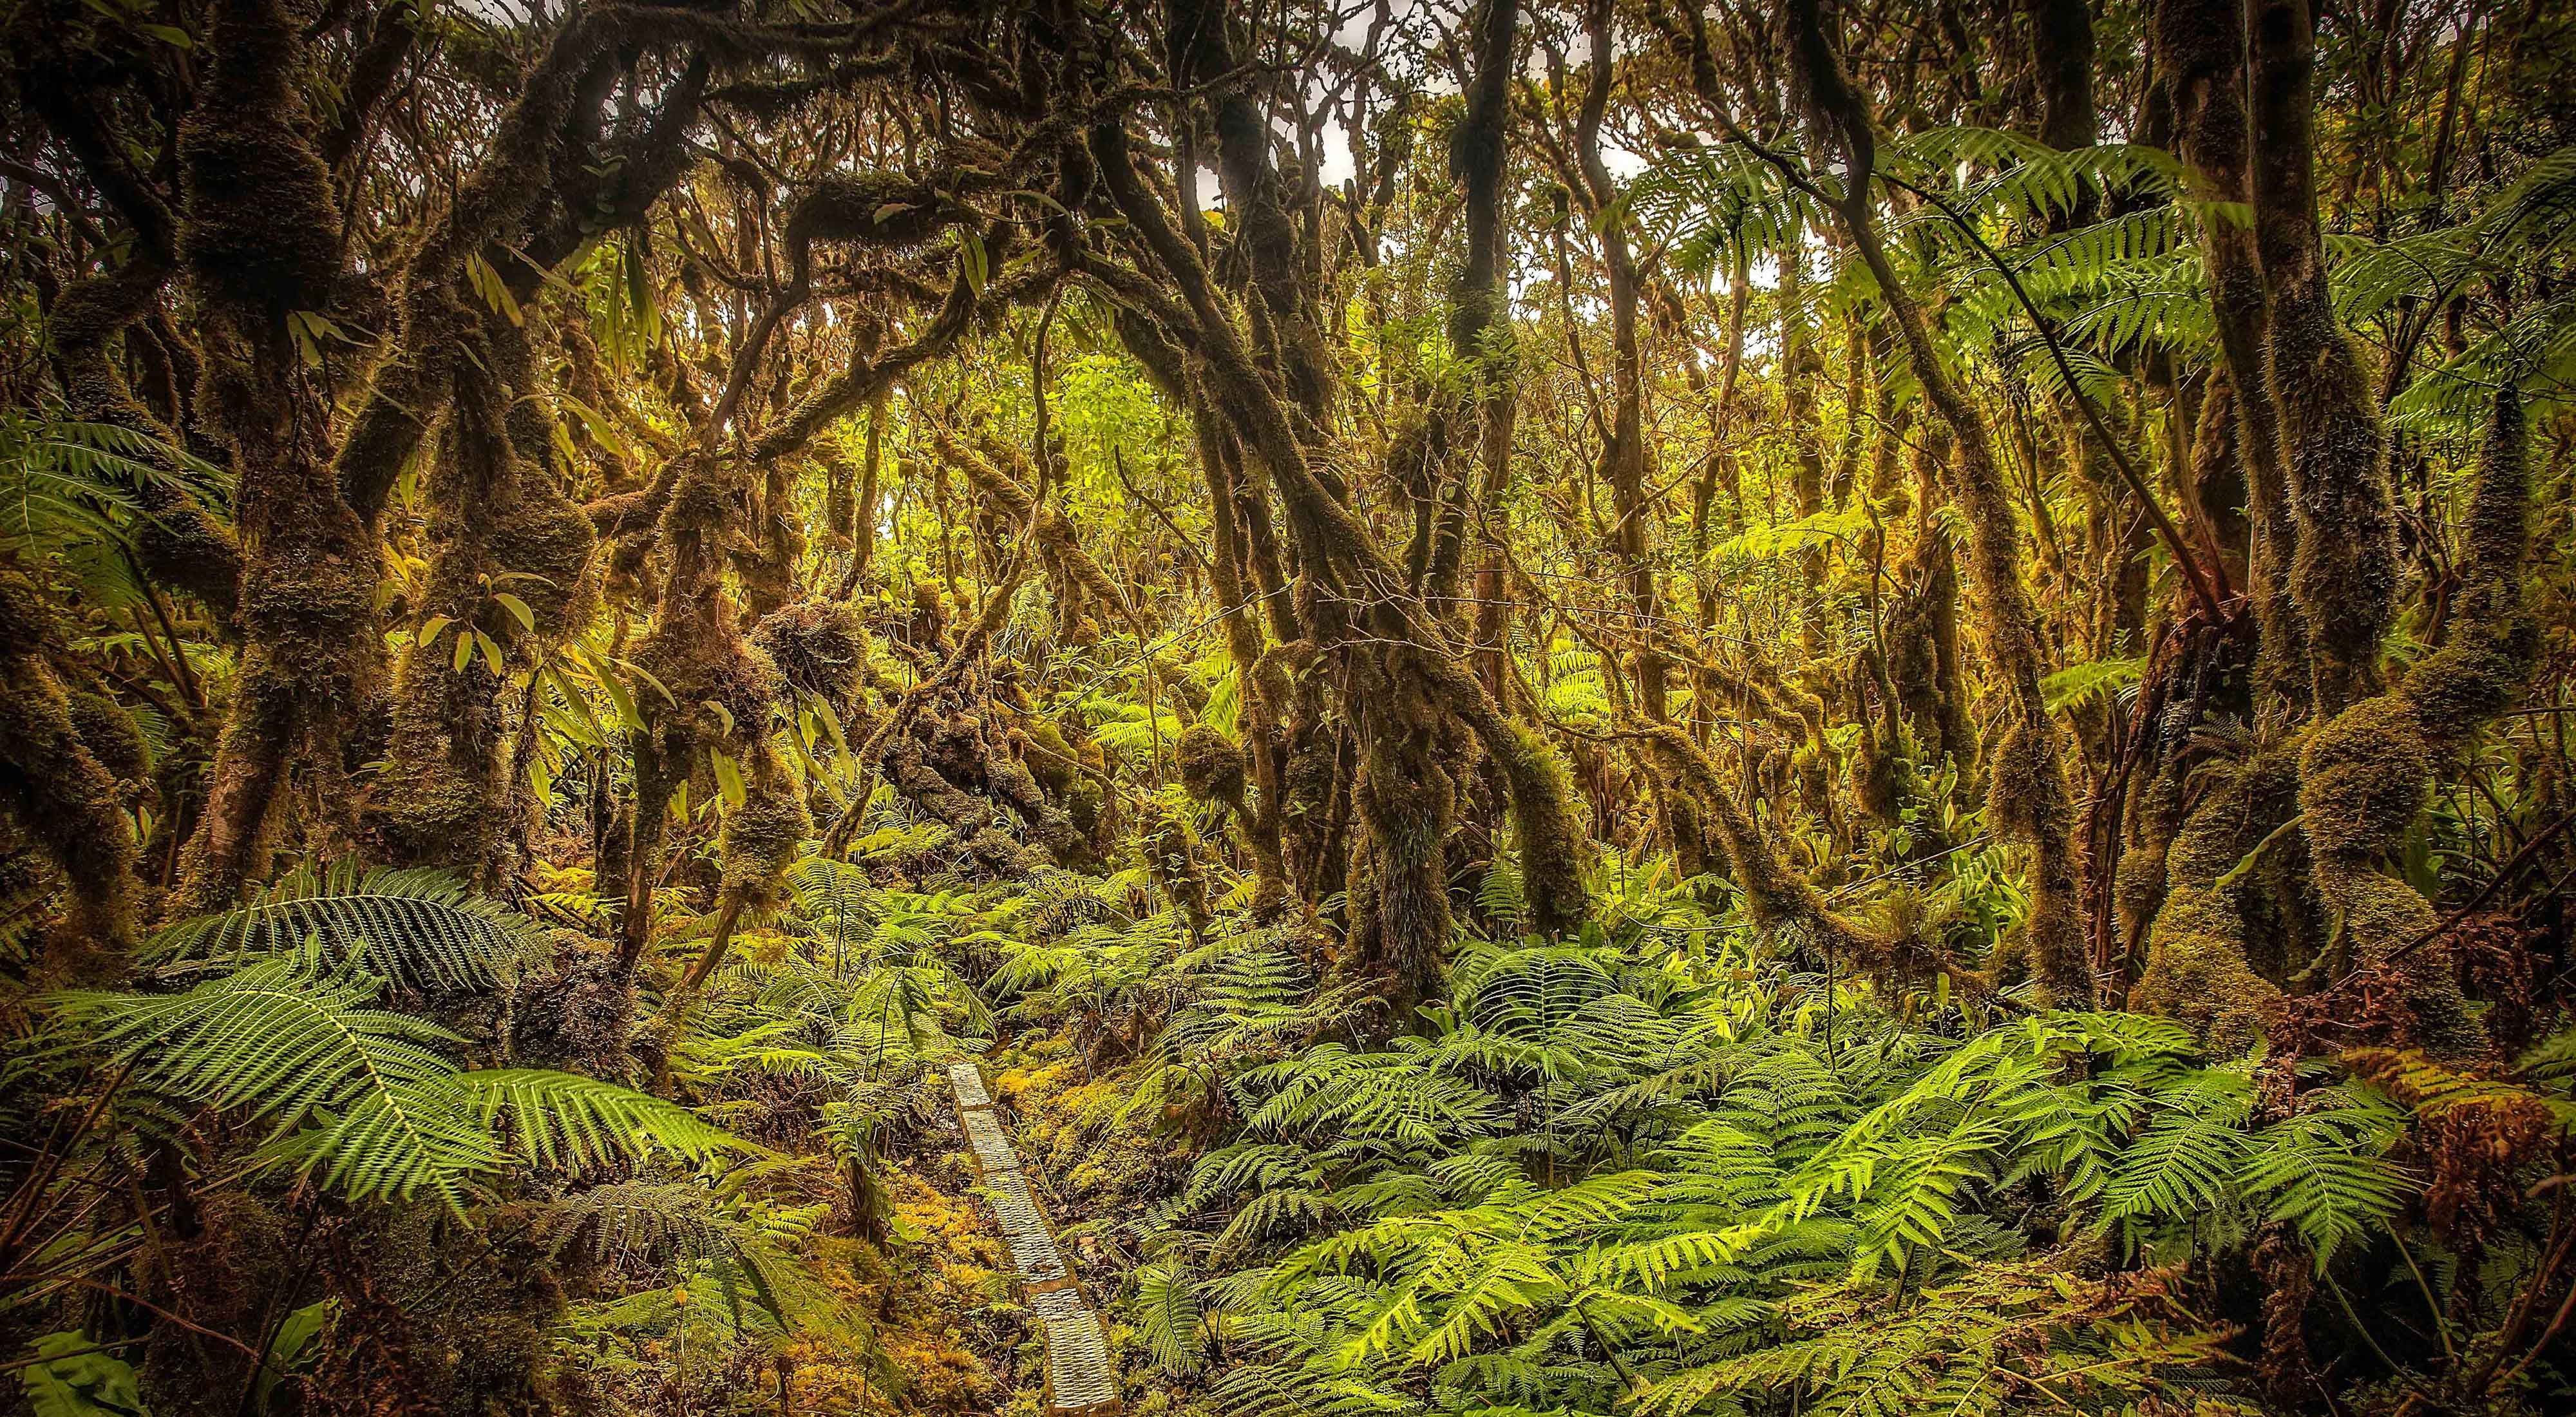 Lush, dense tropical rainforest filled with moss-covered trees and ferns on the forest floor.